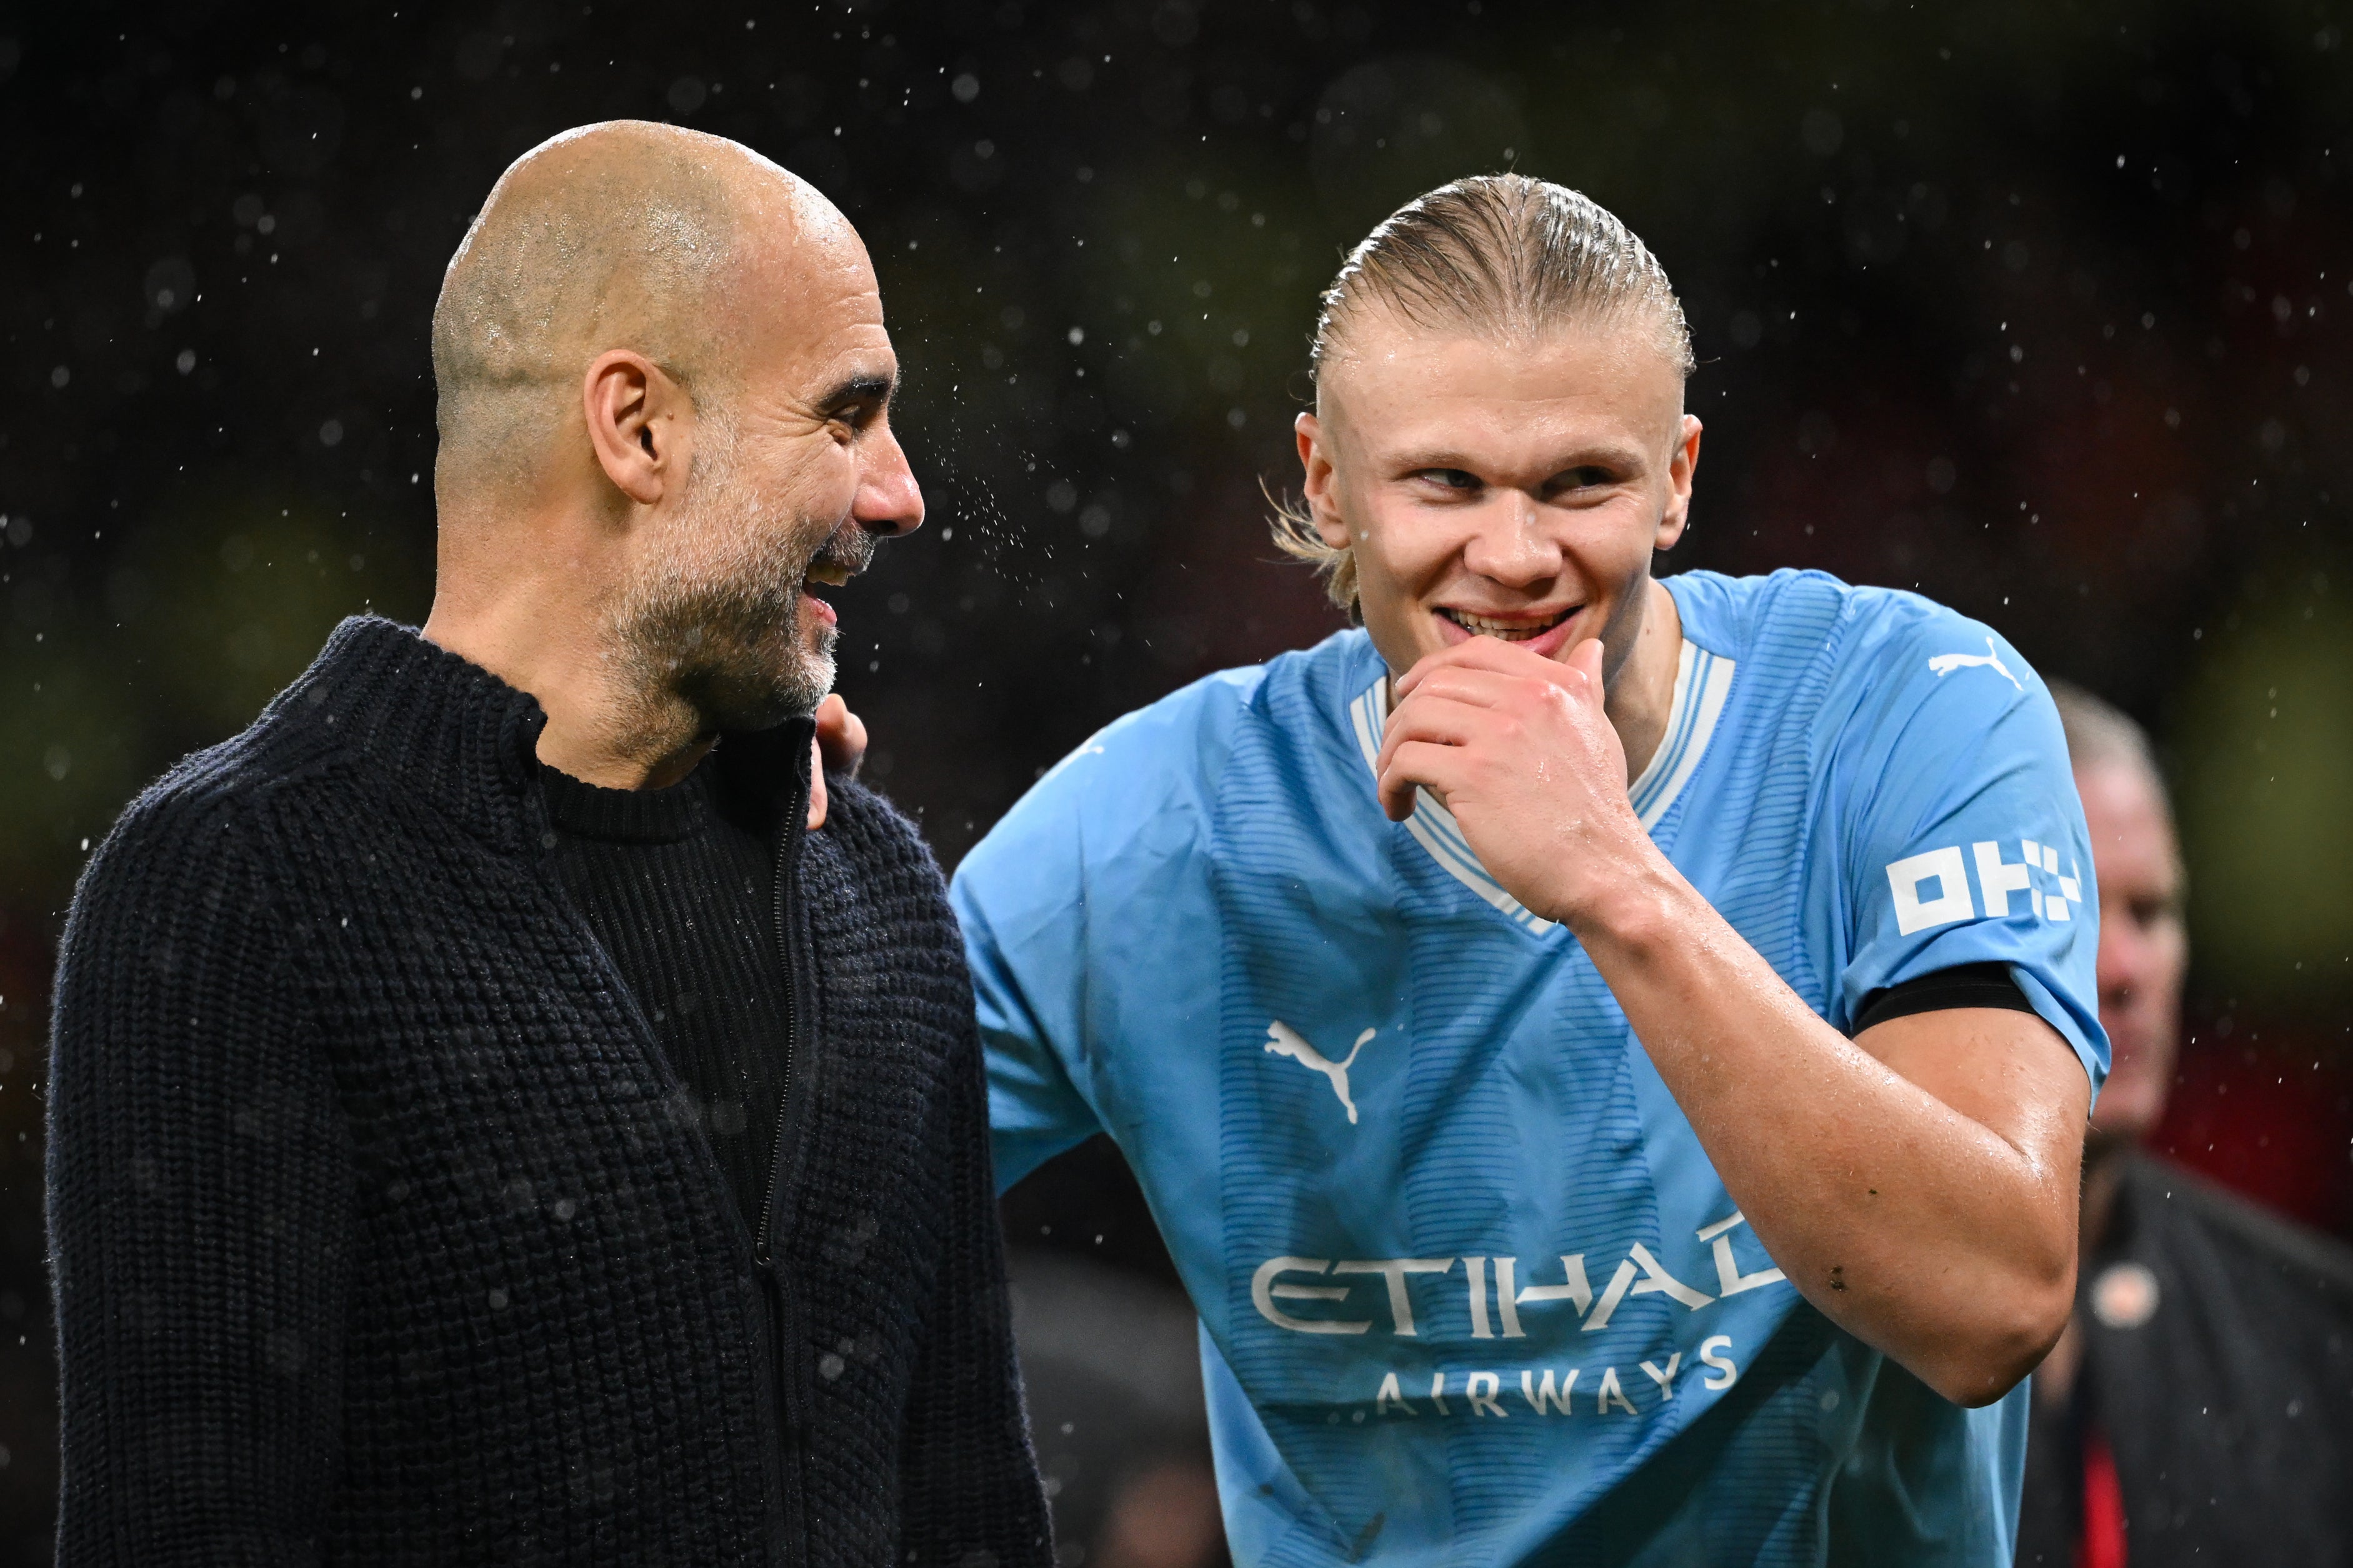 Pep Guardiola says that the presence of the likes of Erling Haaland means Man United won’t have it easy leapfrogging Man City, even after taking their CEO